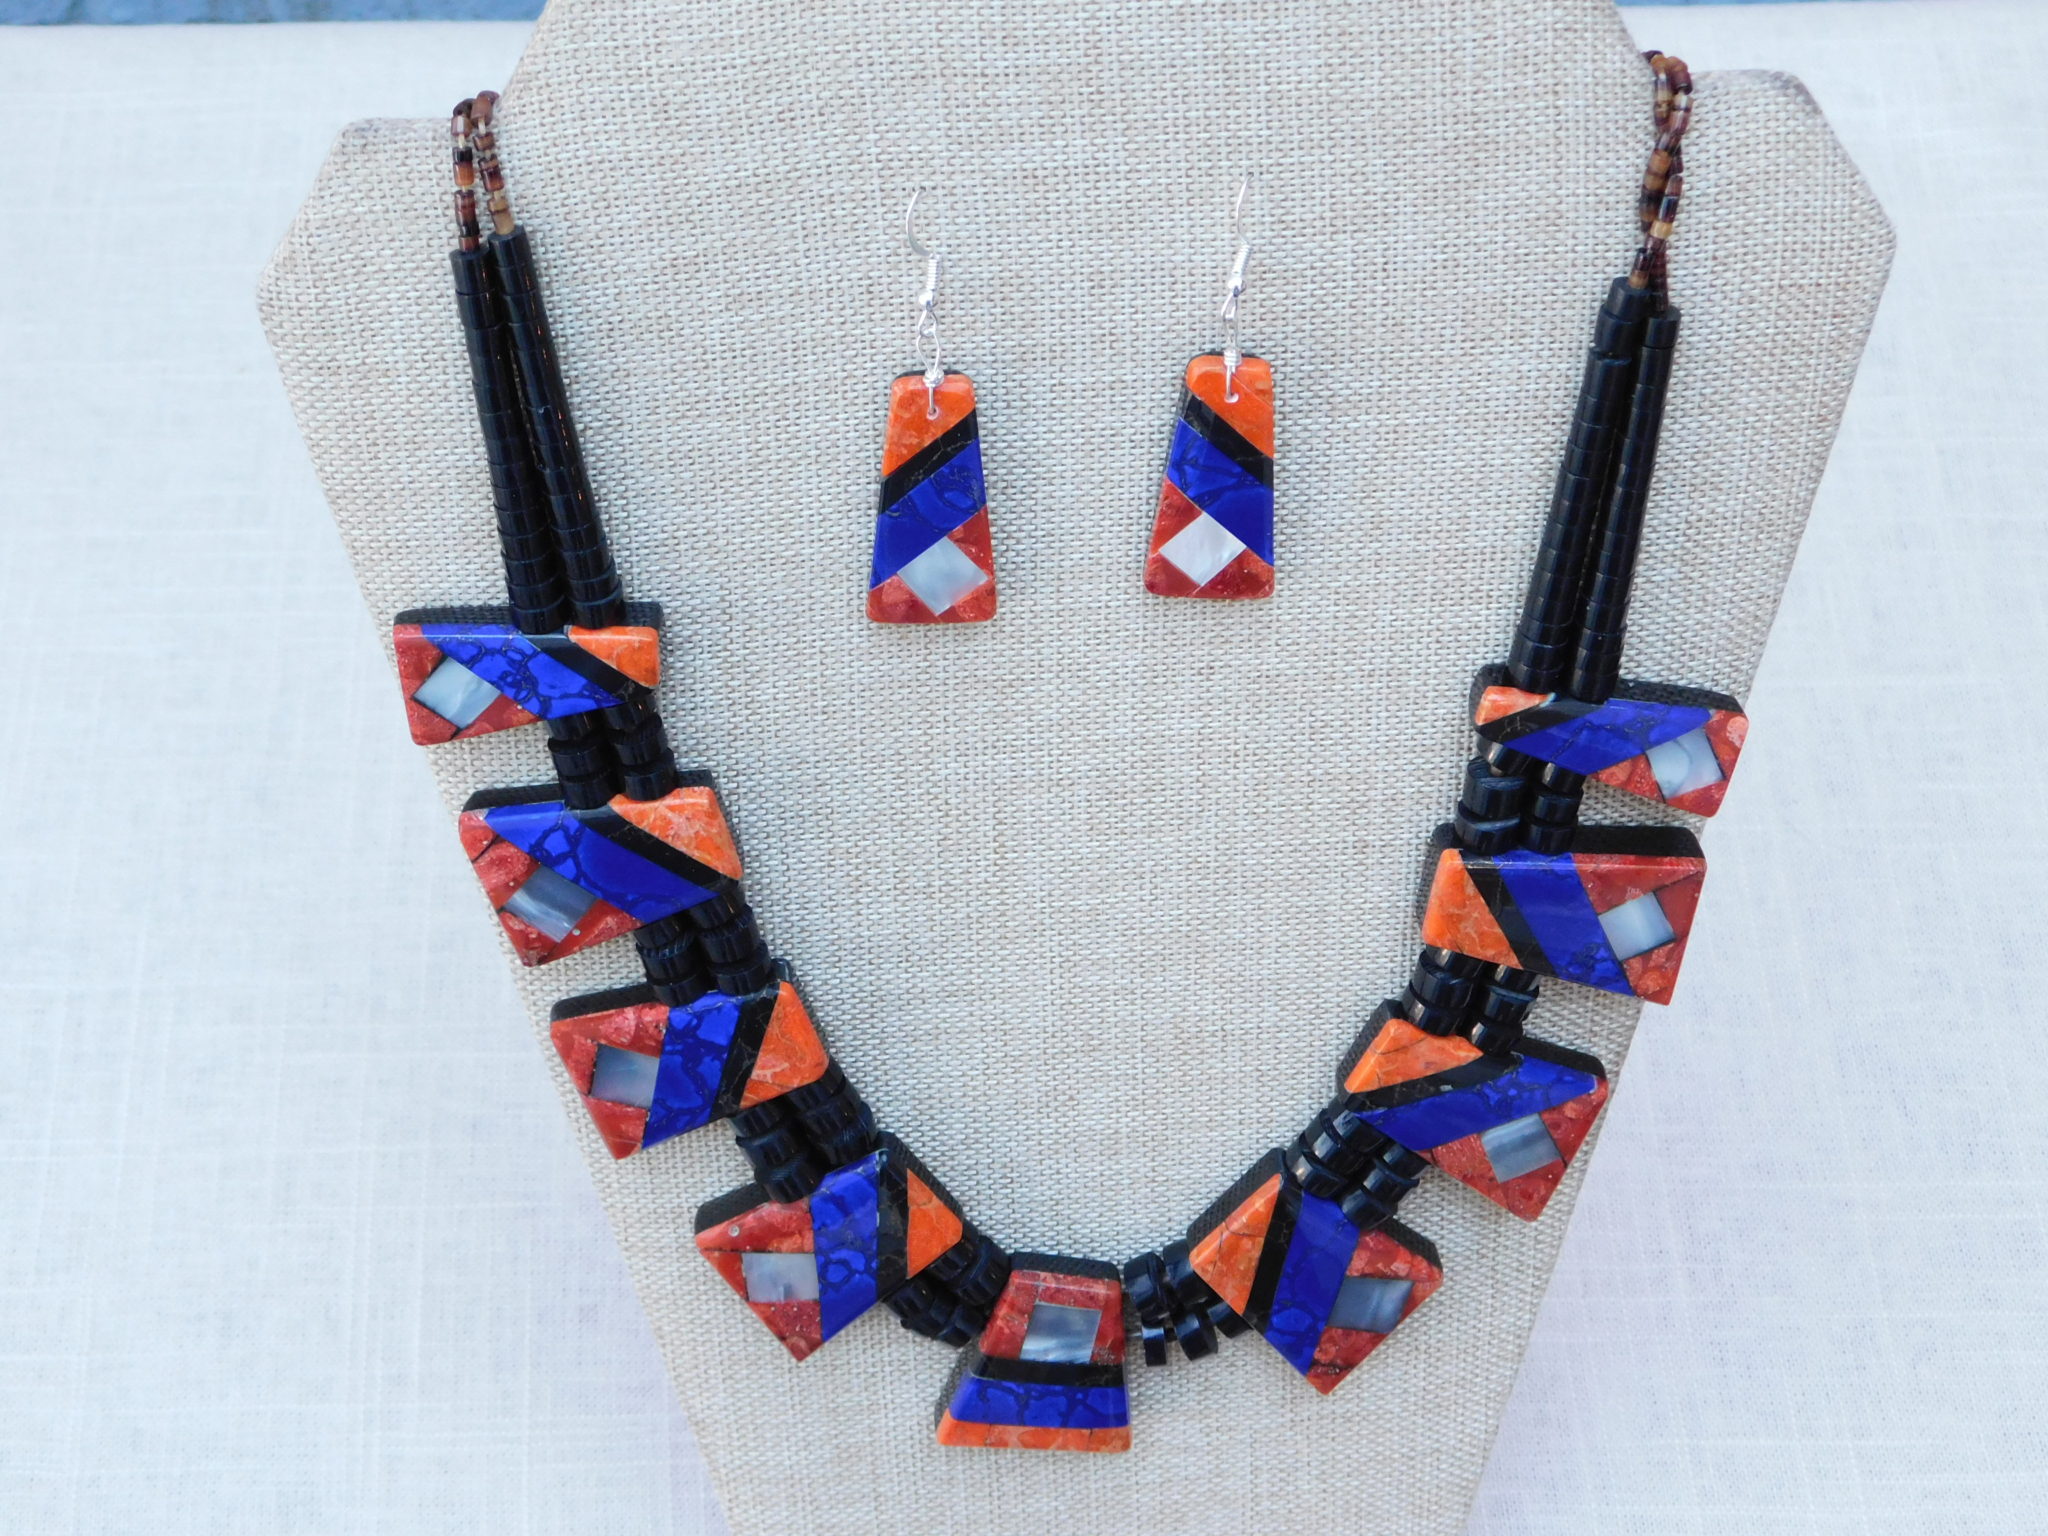 CHERYL LUCERNO Santo Domingo Inlay Necklace and Earrings